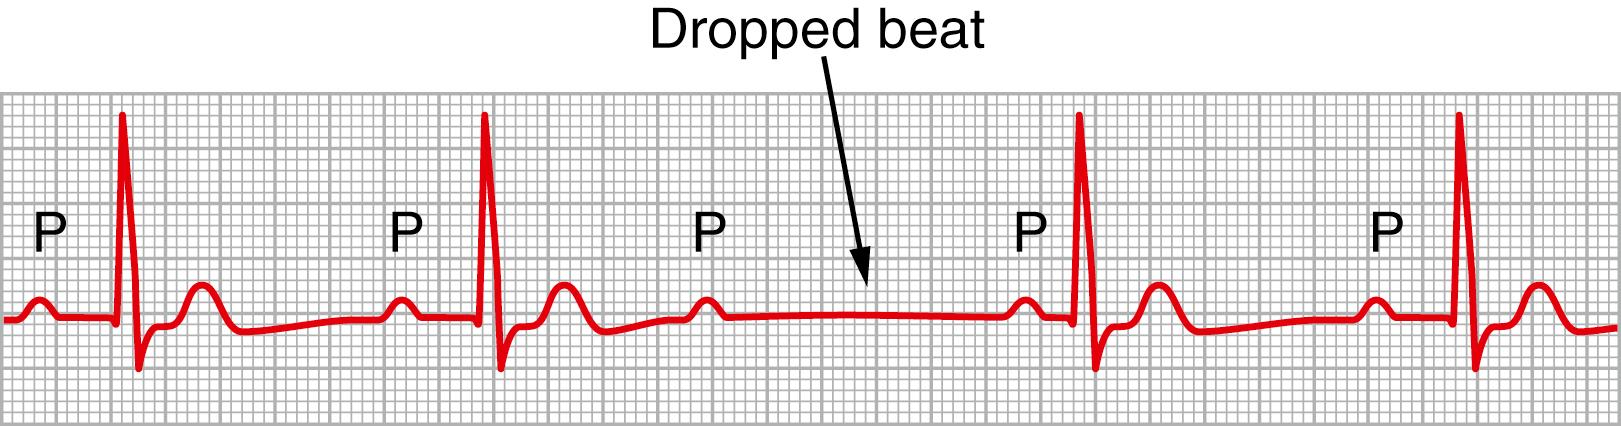 Figure 13-6, Type I second-degree atrioventricular block showing progressive P-R prolongation prior to the dropped beat.